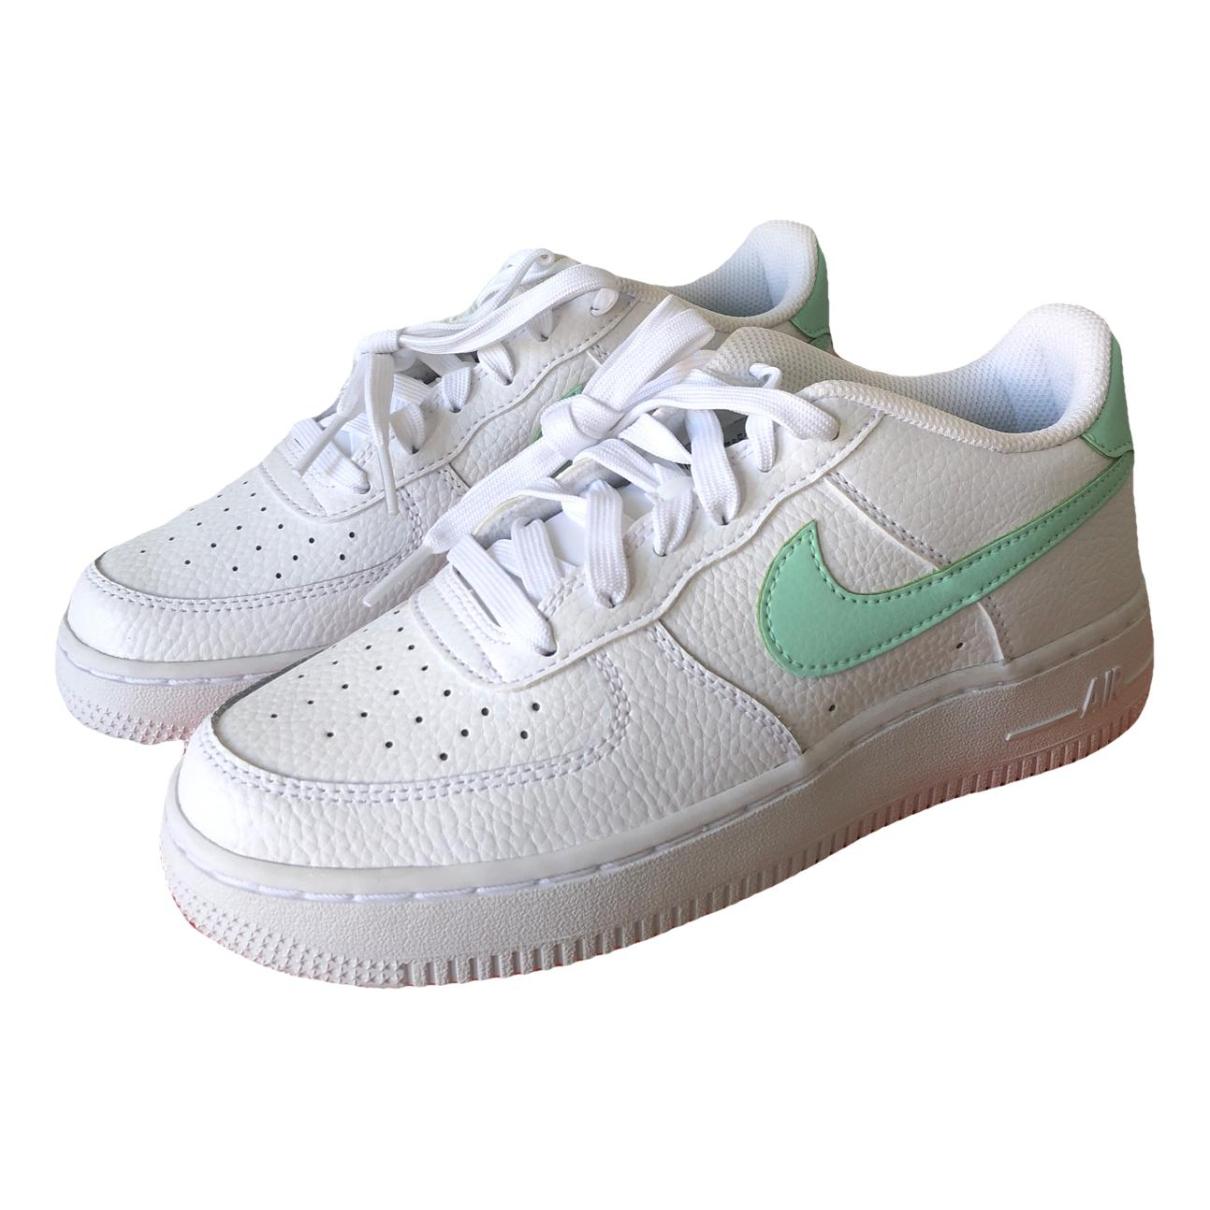 Air force 1 leather trainers Nike White size 37.5 EU in Leather - 37453220